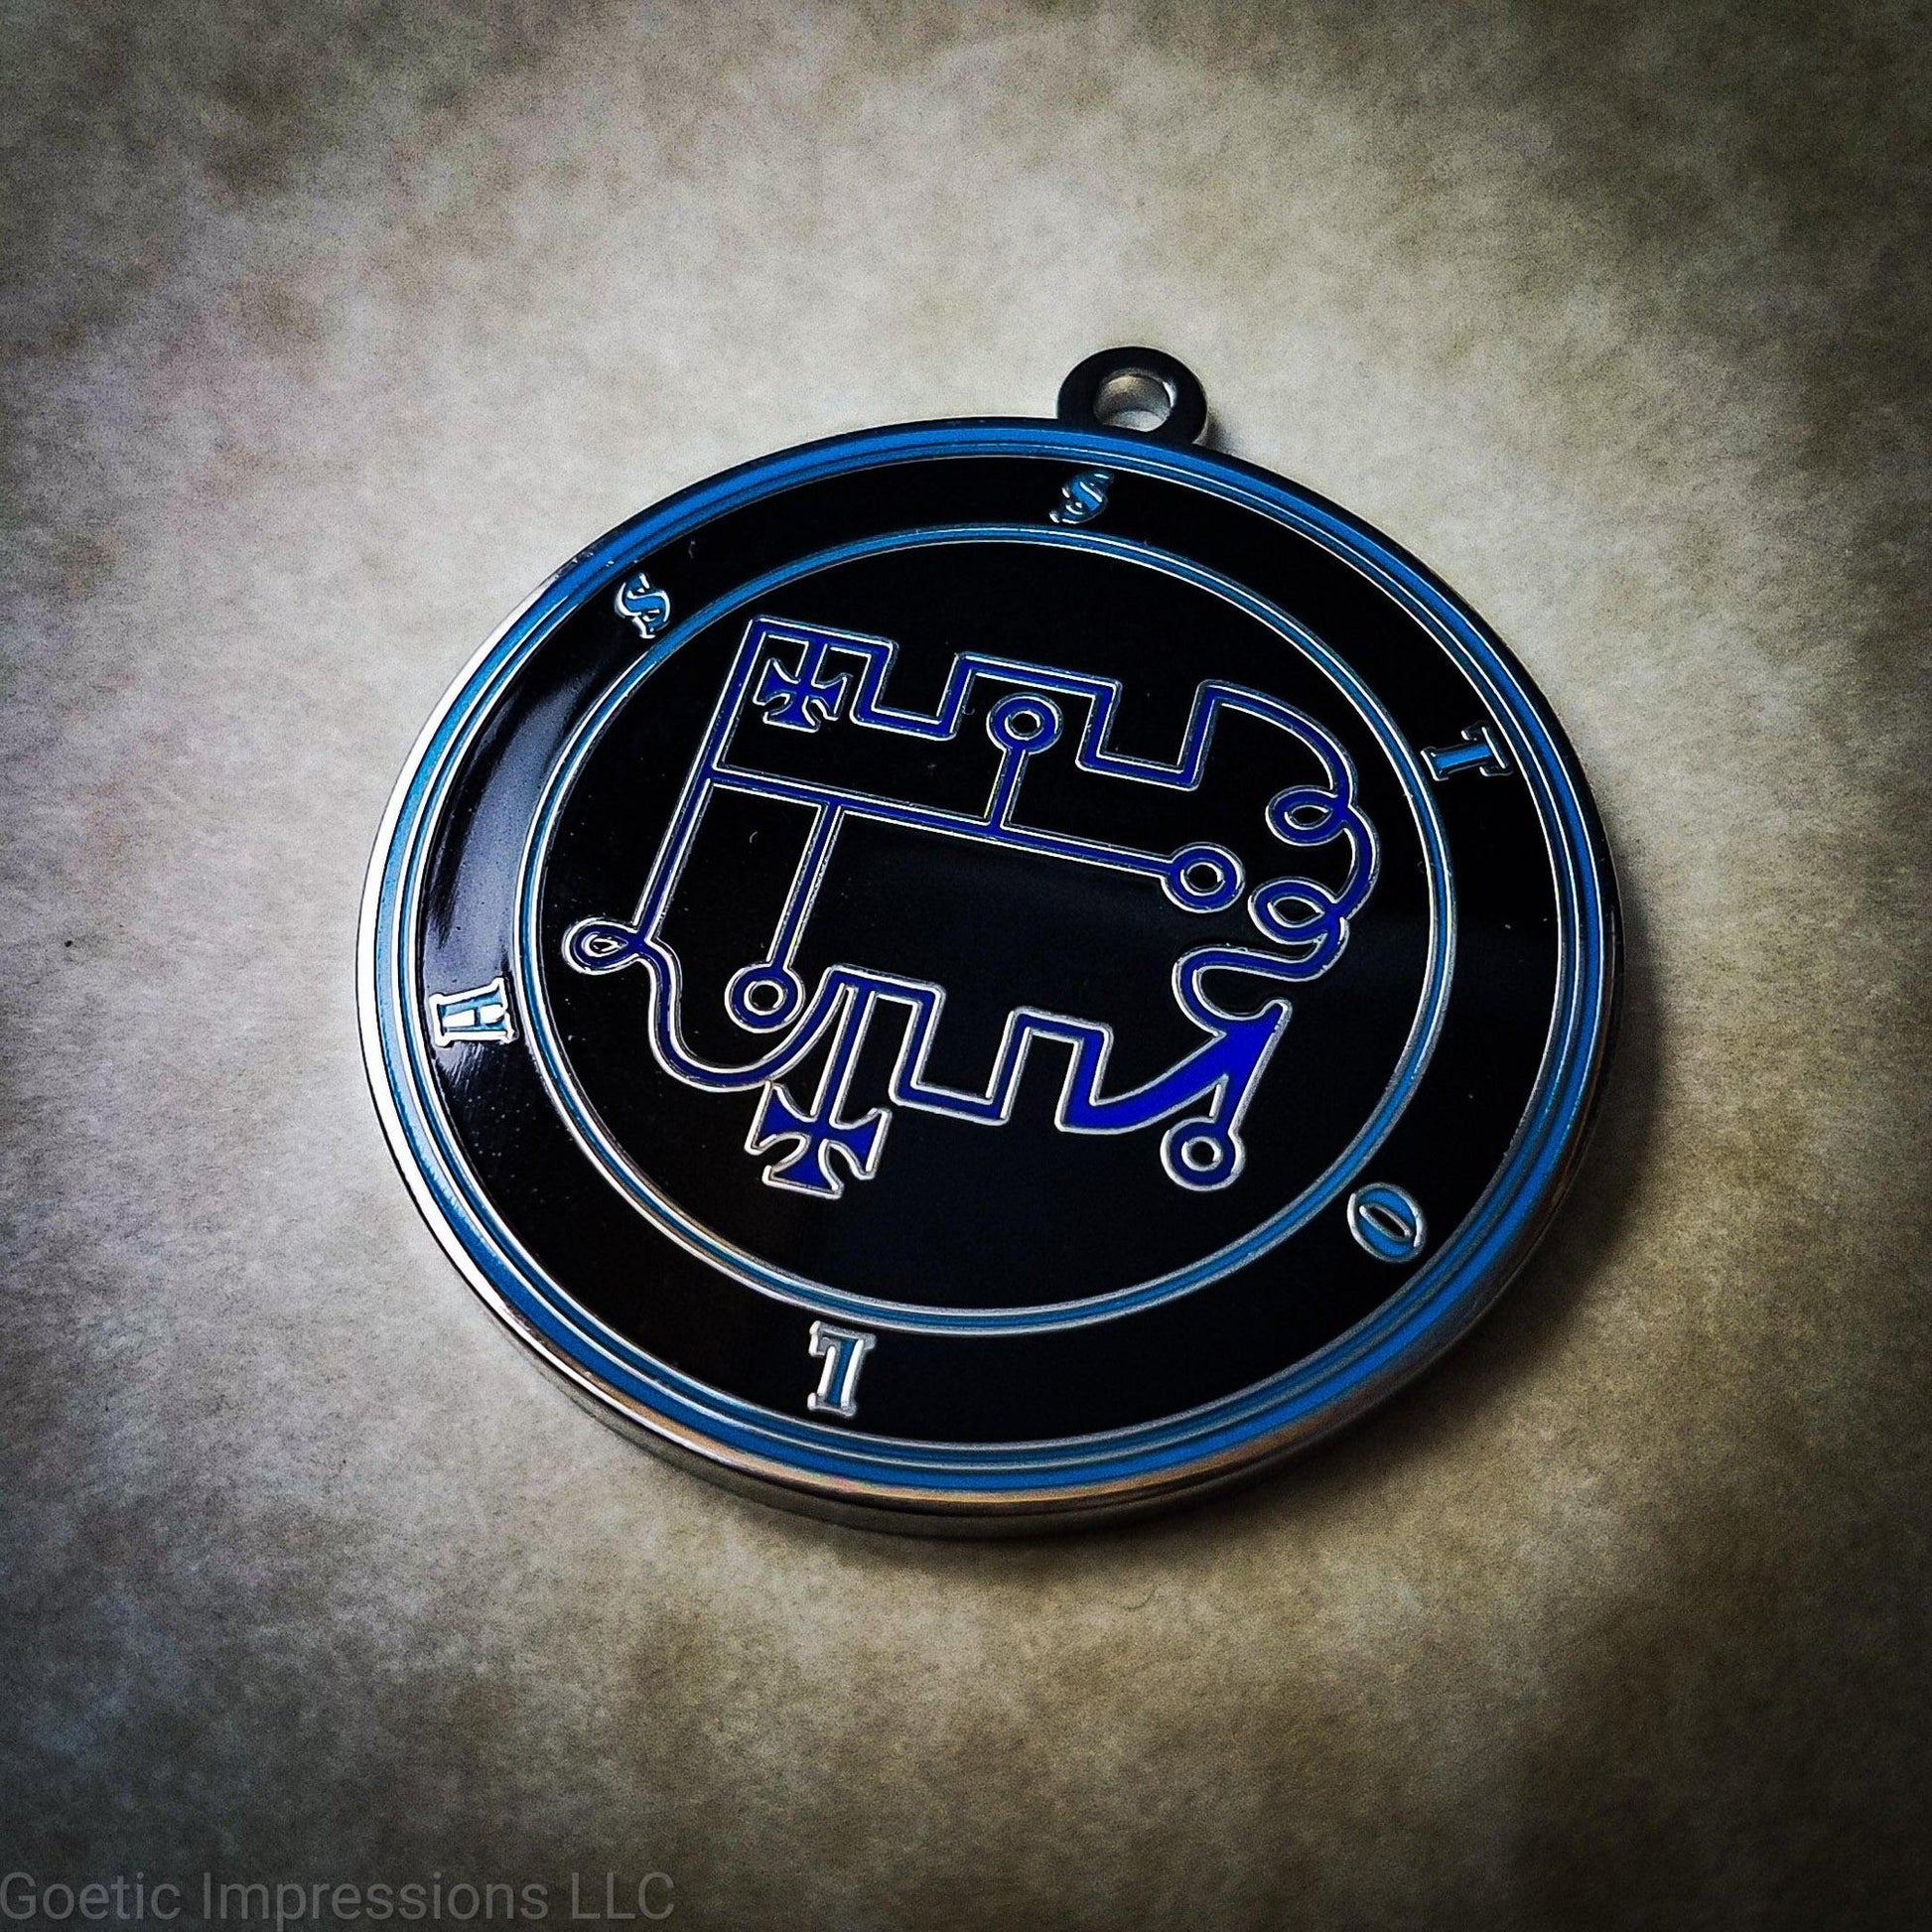 Talisman of goetic spirit Stolas . Stolas's sigil is dark blue with the circles surrounding in teal along with the name on a black background. 